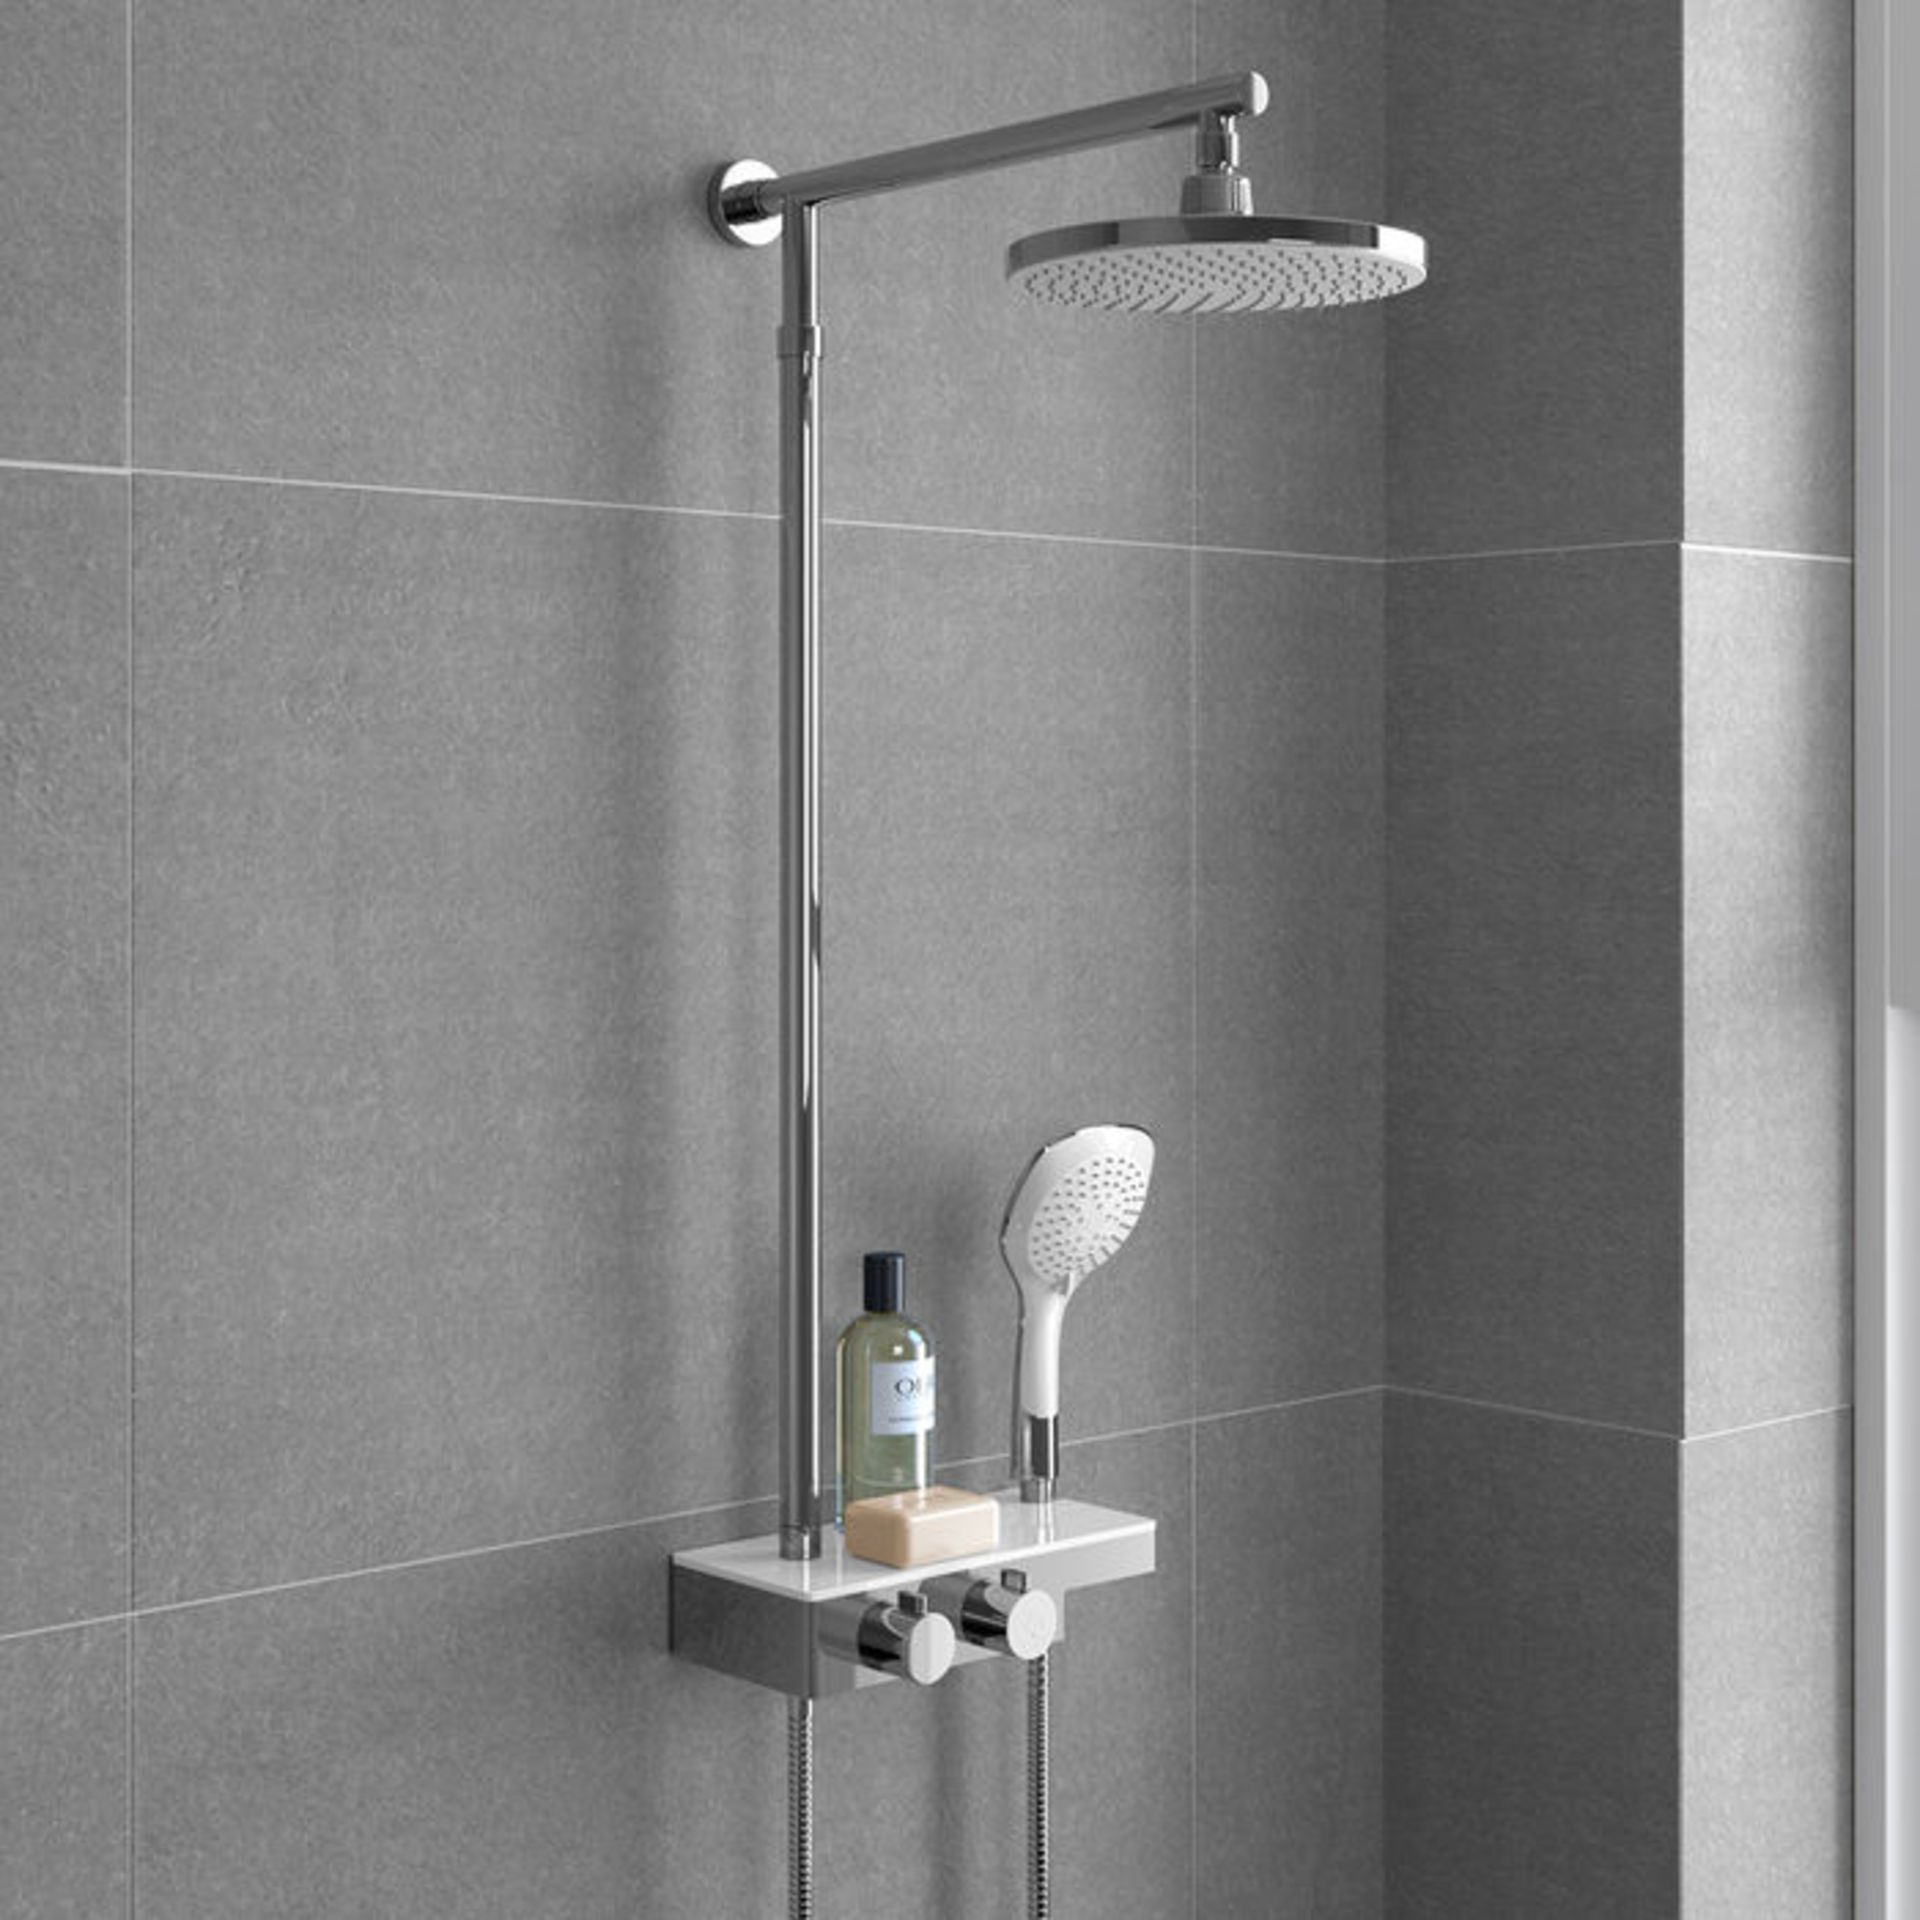 (MW41) Round Exposed Thermostatic Mixer Shower Kit Medium Head & Shelf. RRP £349.99. Cool to touch - Bild 6 aus 6